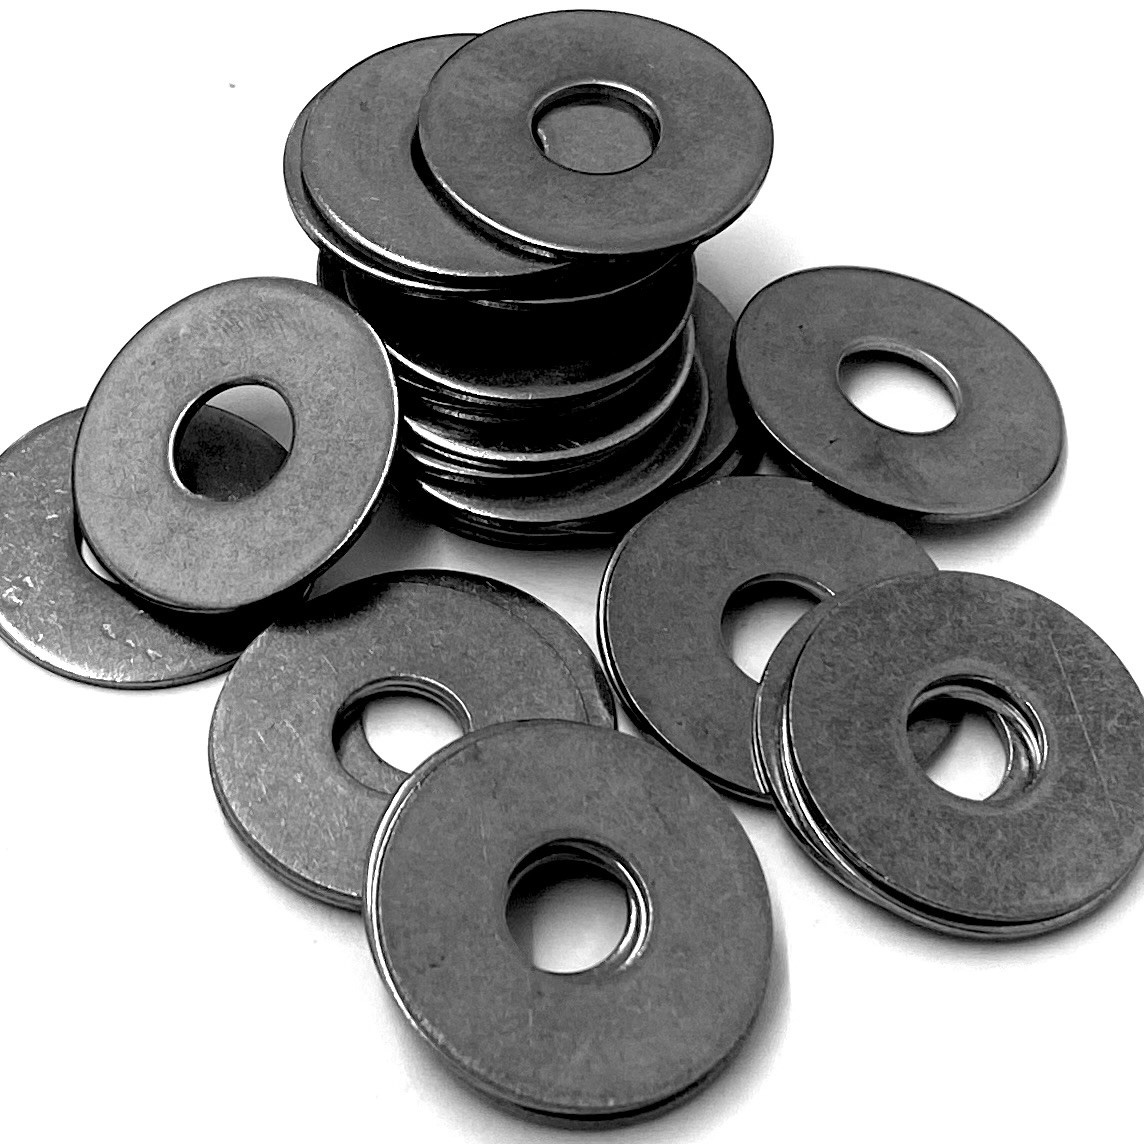 PENNY WASHERS Repair Mudguard Washer M3 M4 M5 M6 M8 M10 A2